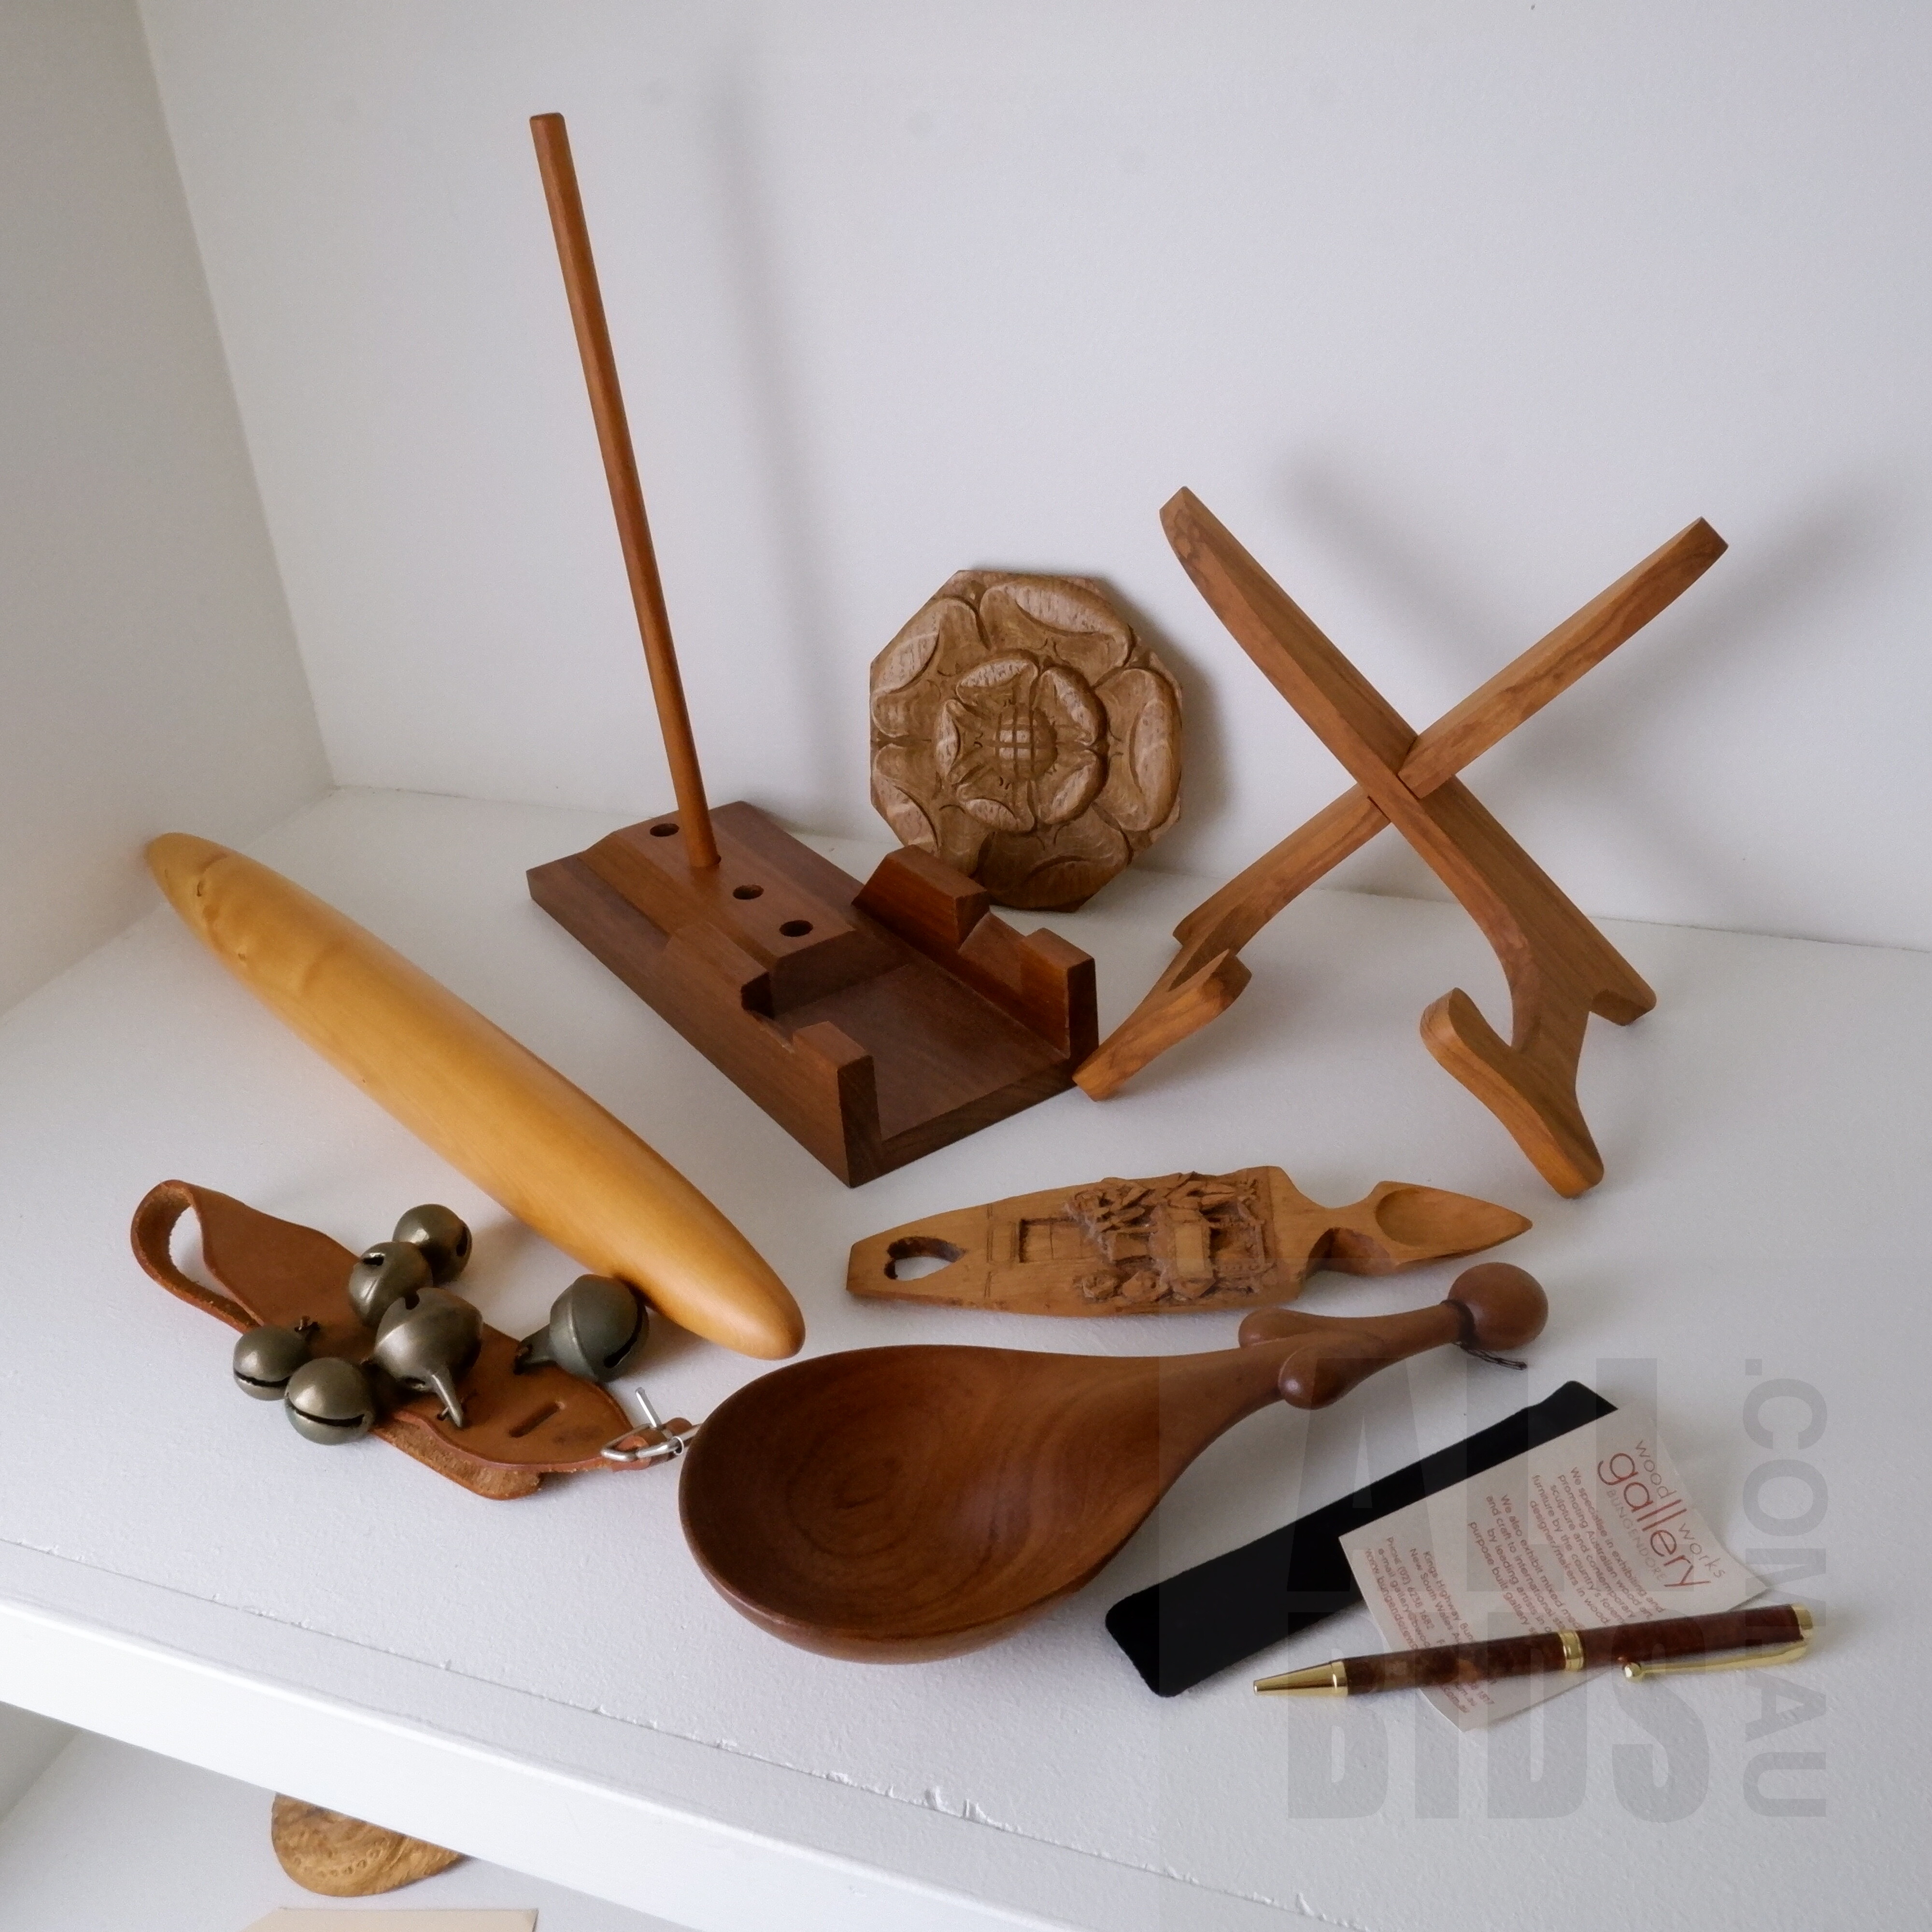 'Collection of Bespoke Hardwood Carvings, Including Plate Stands, Huon Pine Roller, Bungendore Woodworks Pen, Judith Pearson Plaque and More'